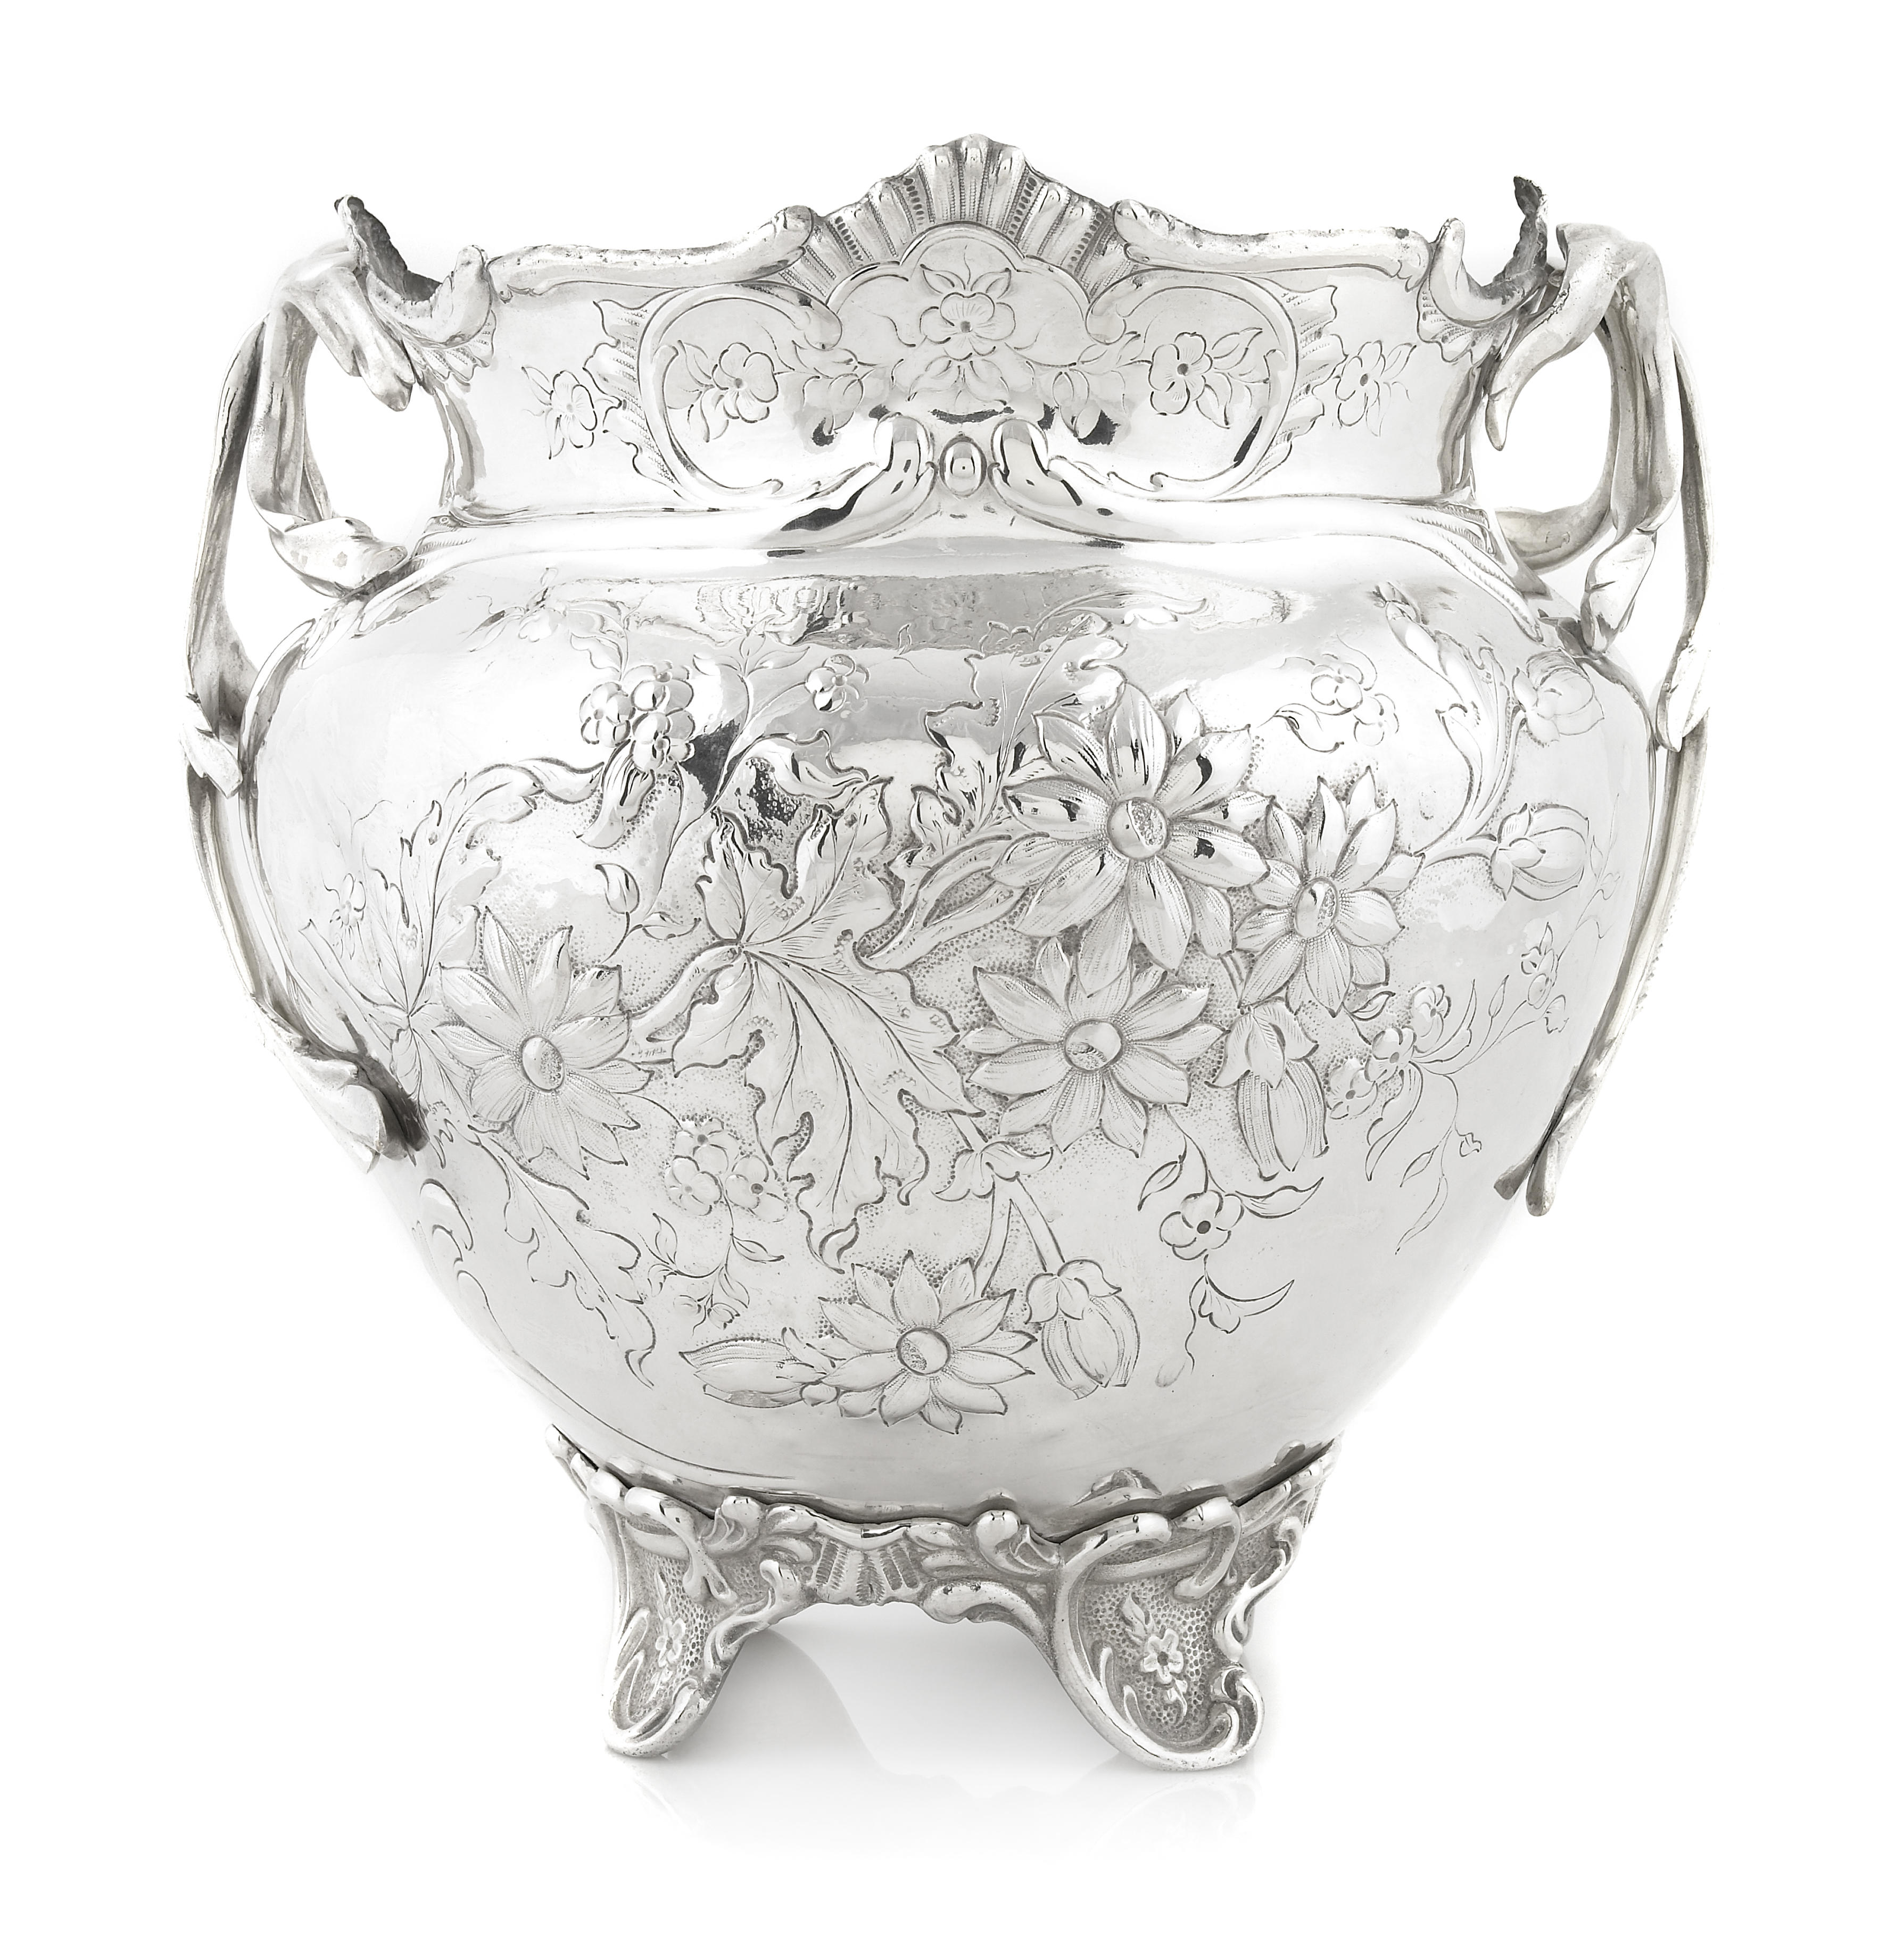 A French Art Nouveau silverplated